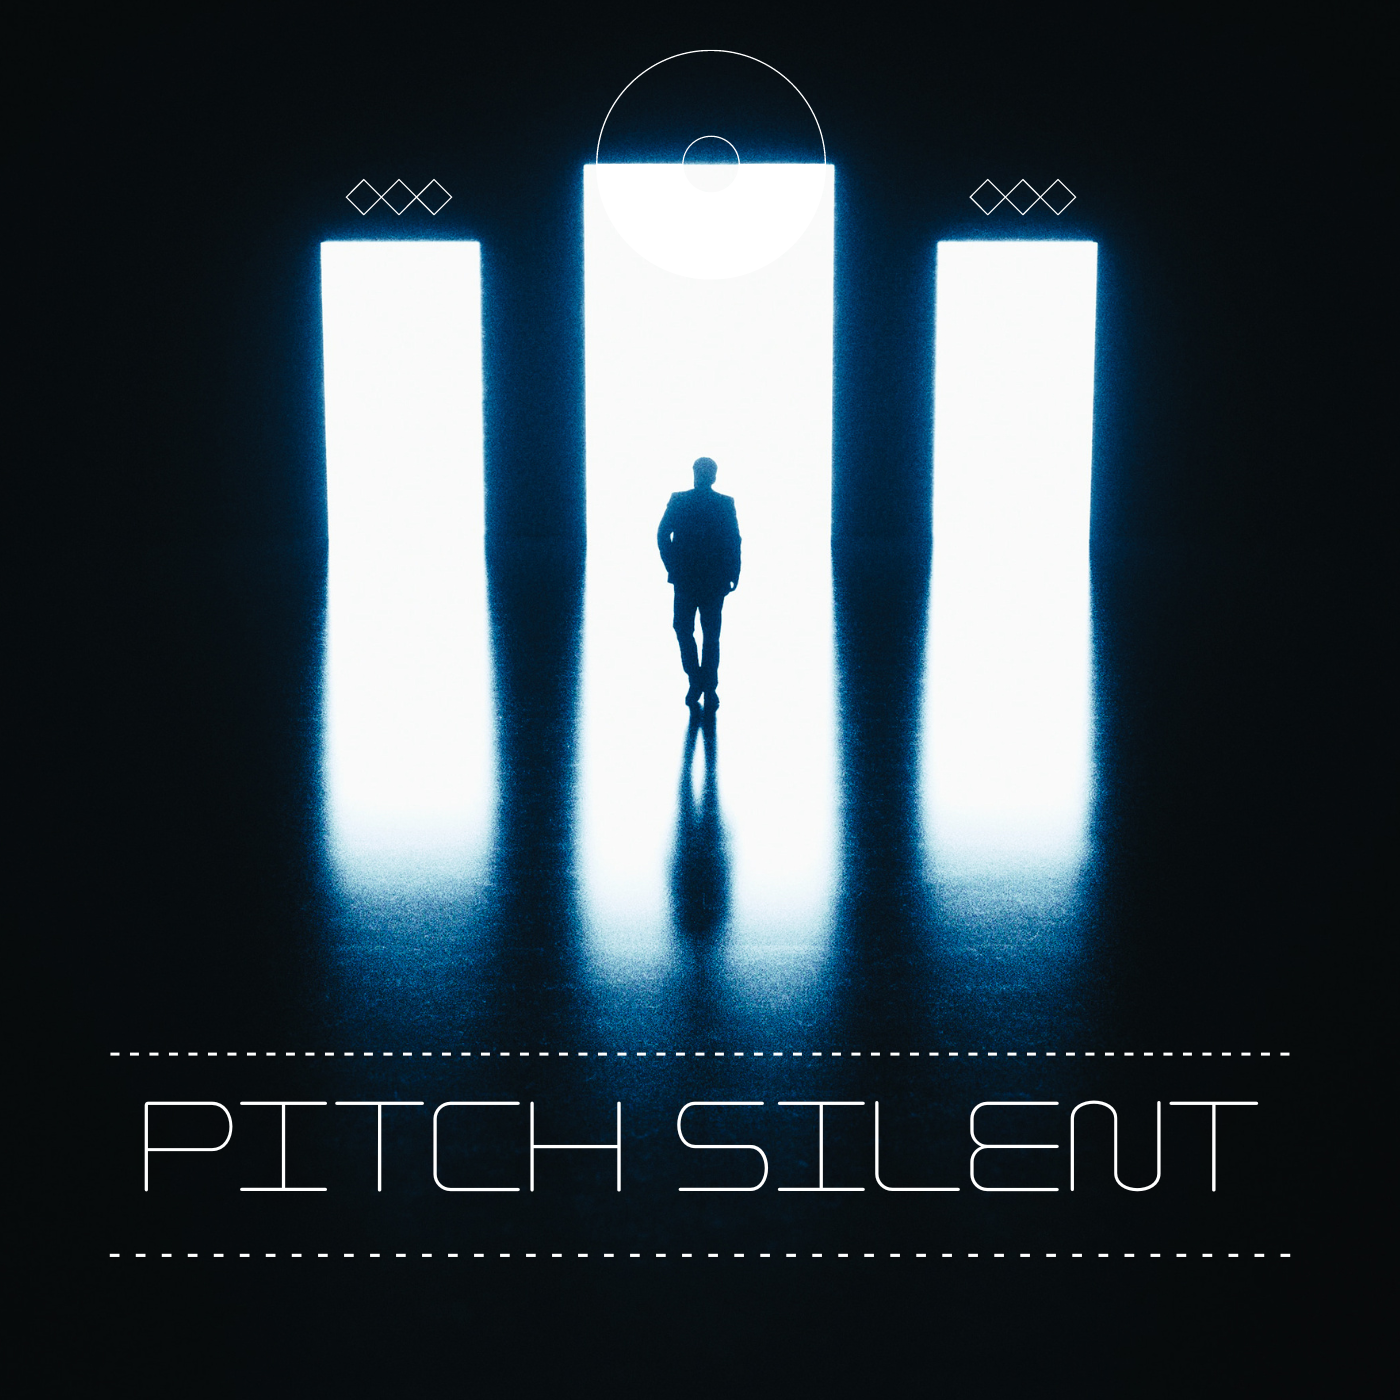 Pitch Silent